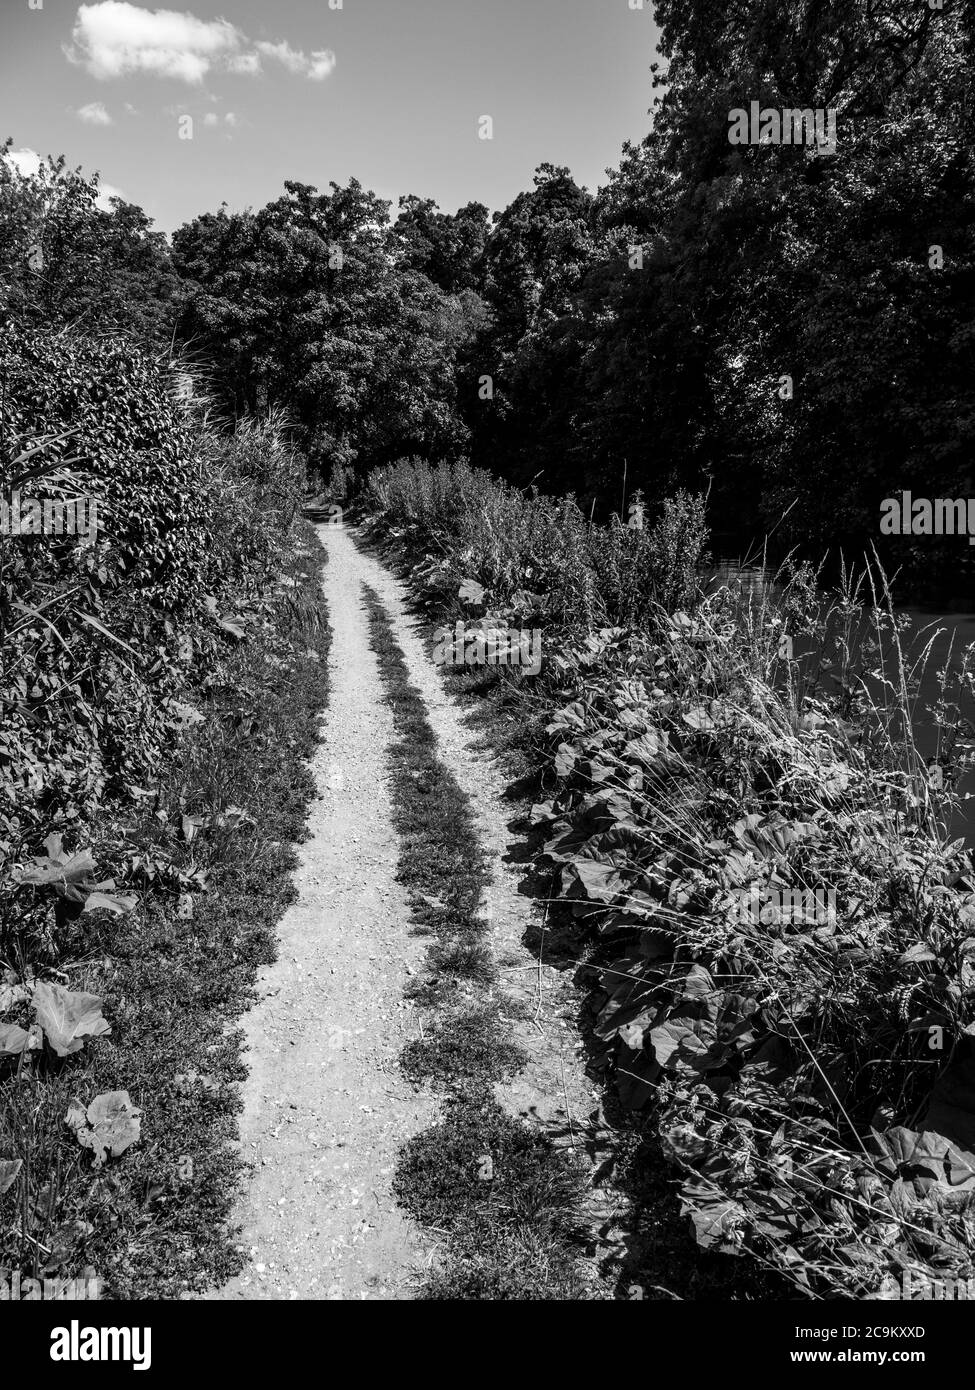 Black and White Landscape of Footpath, Kennett and Avon Canal, Kintbury, Hungerford, Berkshire, Angleterre, Royaume-Uni, GB. Banque D'Images